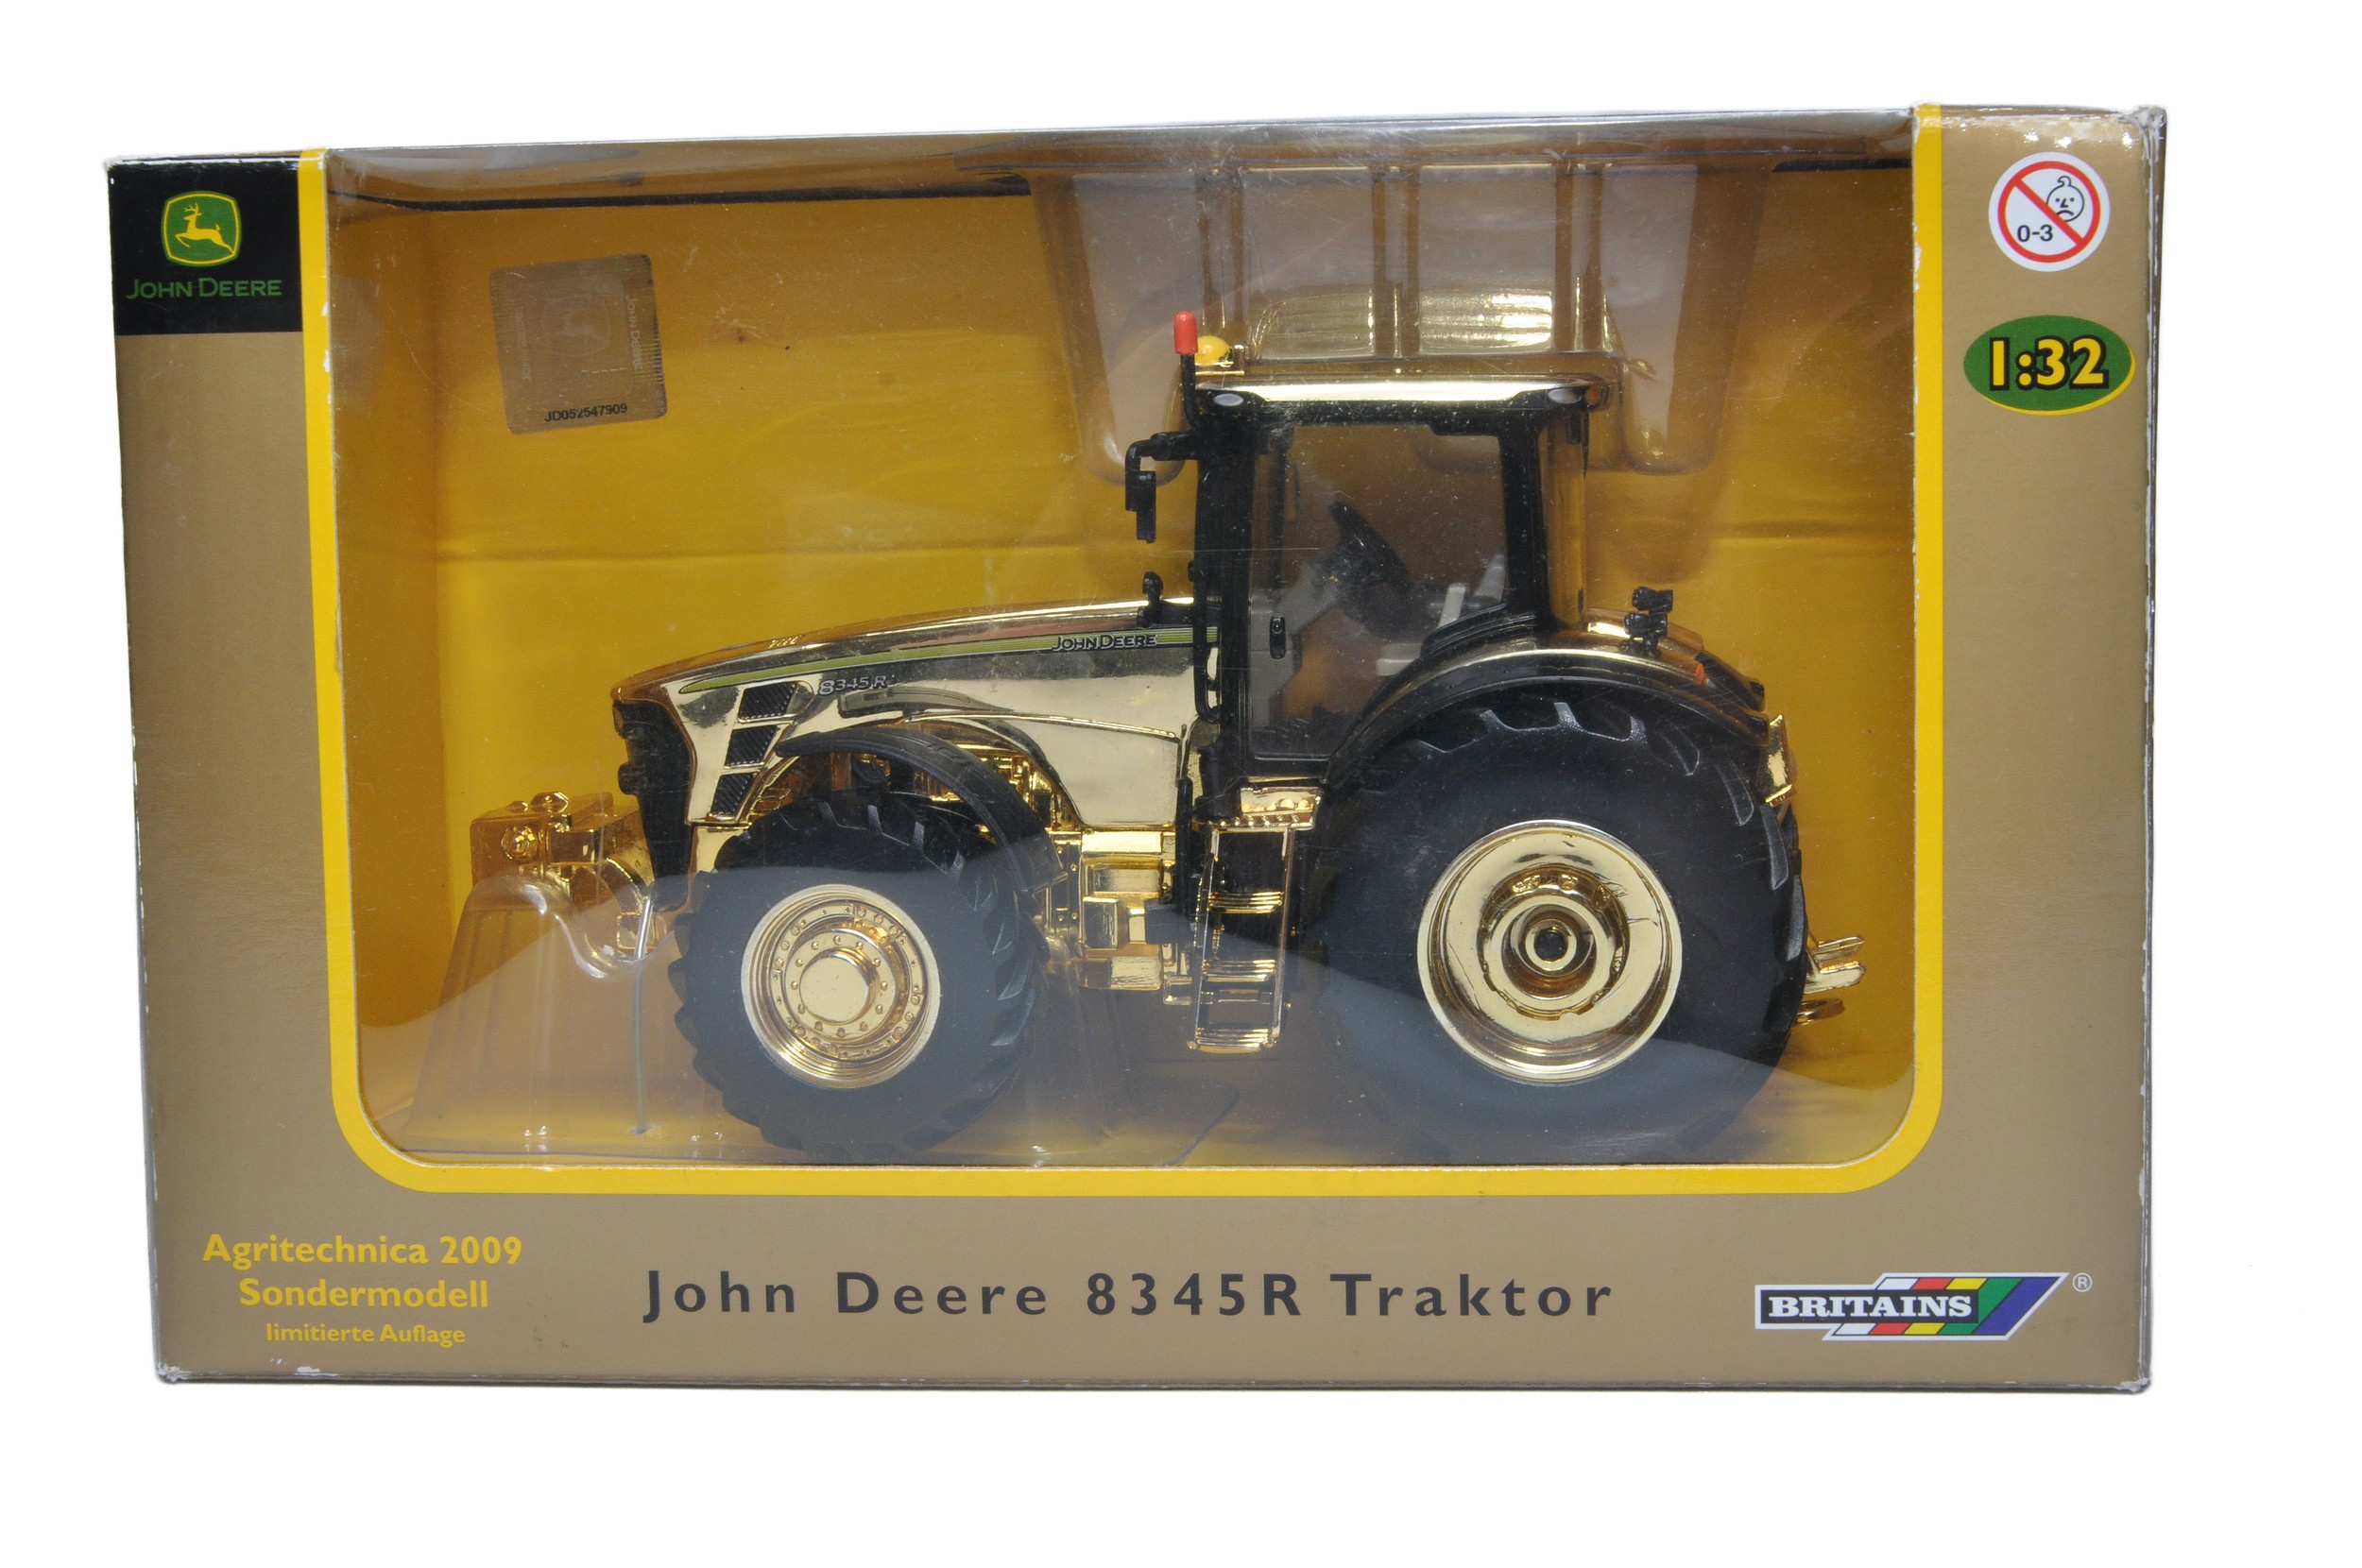 Britains Farm No. 42590 John Deere 8345R Tractor. Special Gold Edition for Agritechnica 2009. - Image 2 of 6